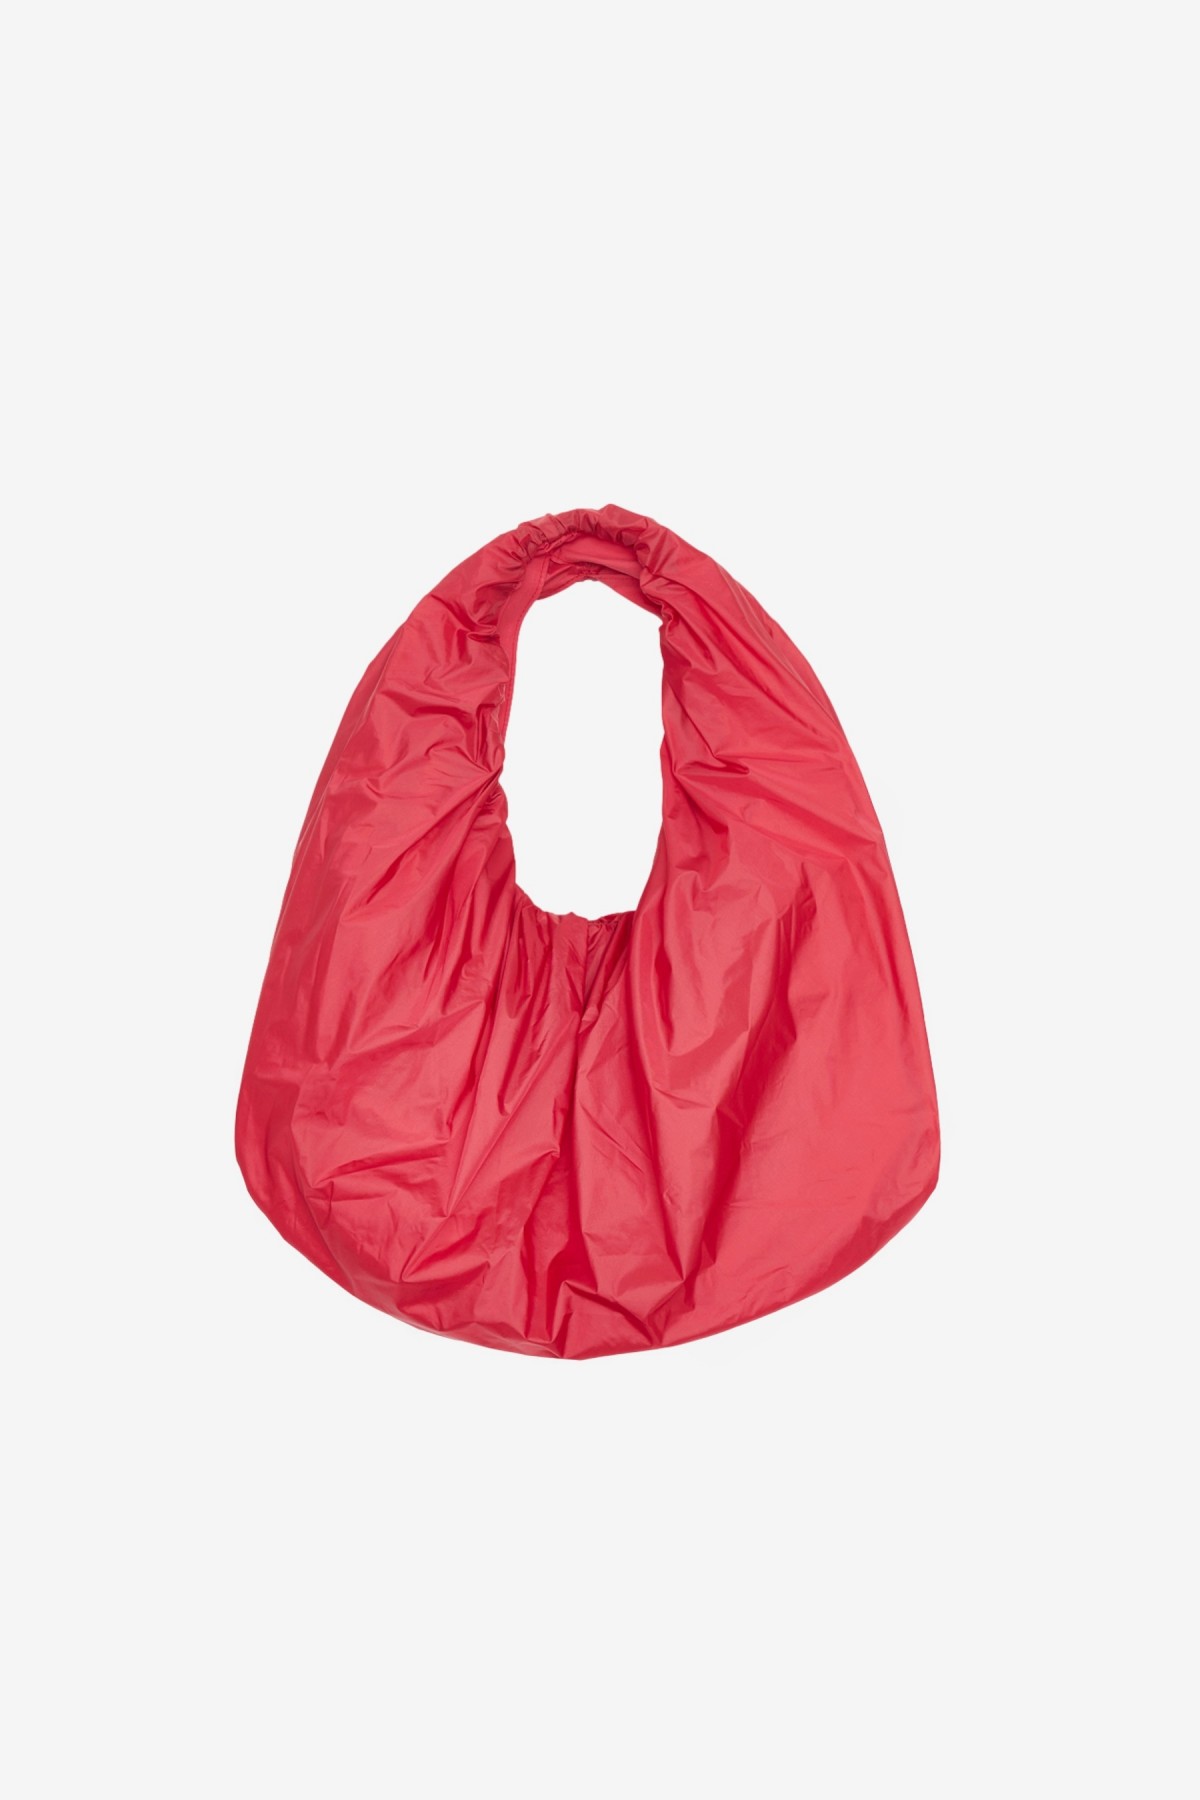 Amomento Shirring Tote Bag in Red